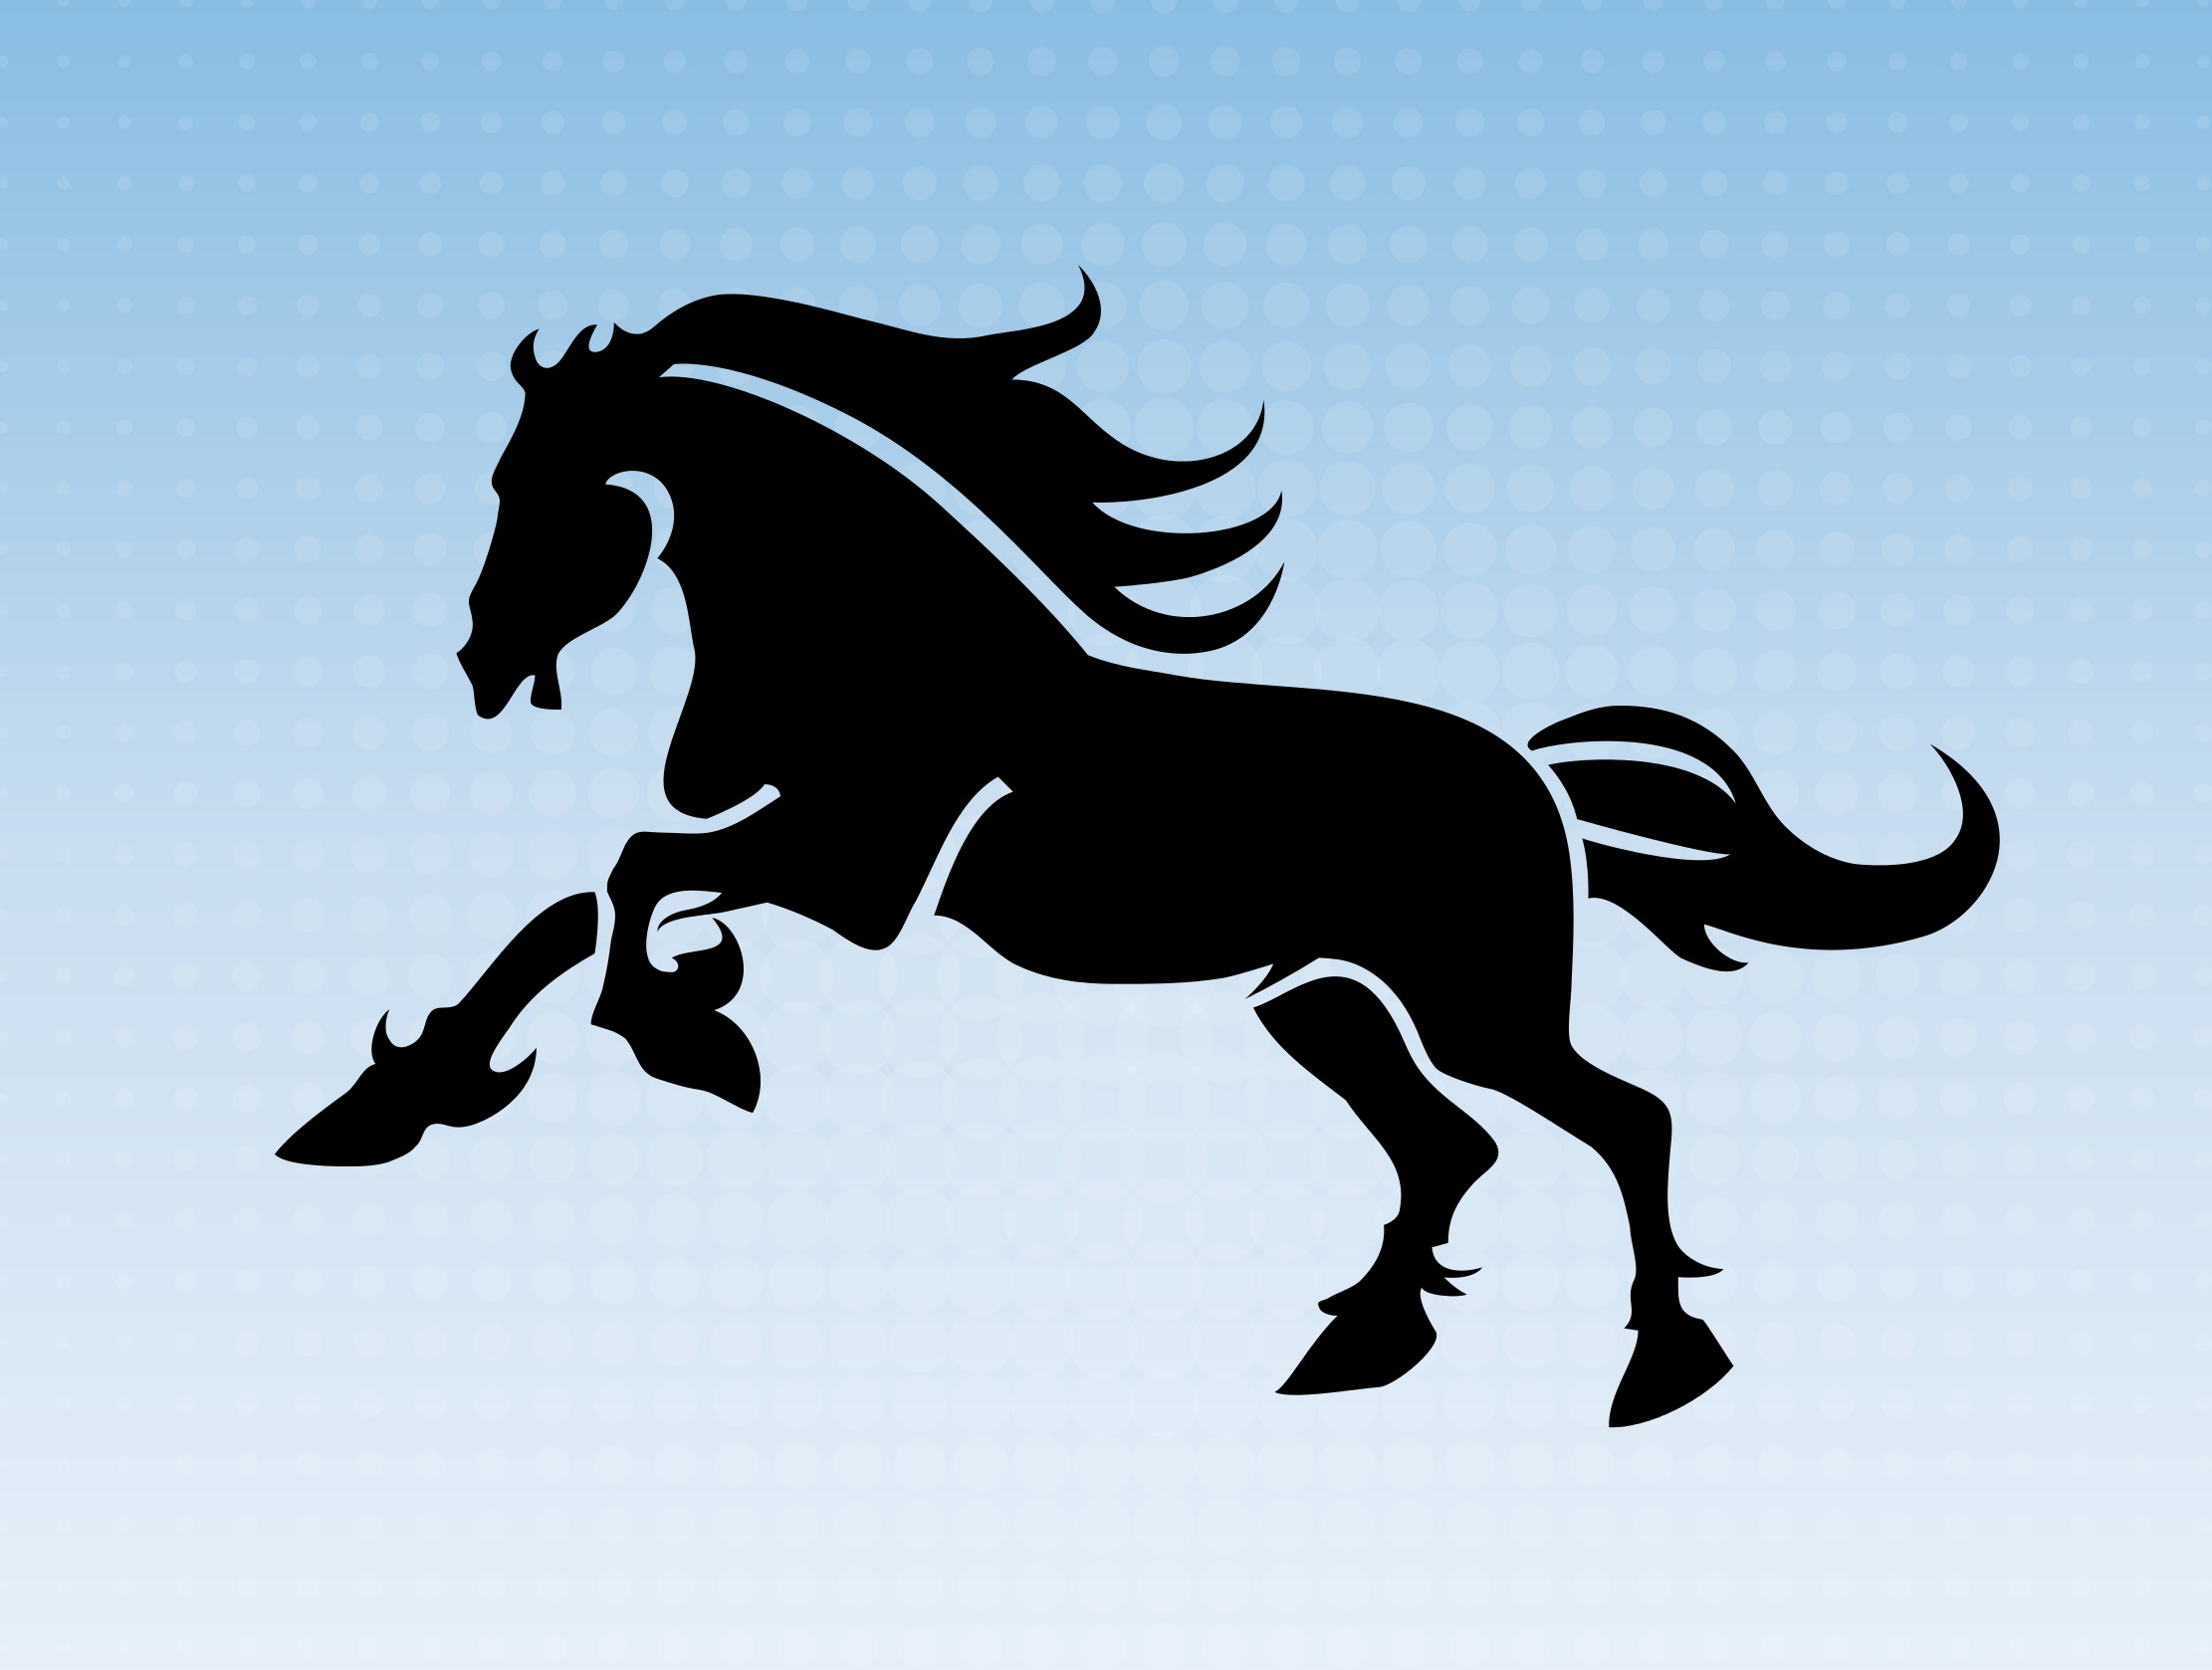 Download Running Horse Silhouette - Download Free Vector Art, Stock ...